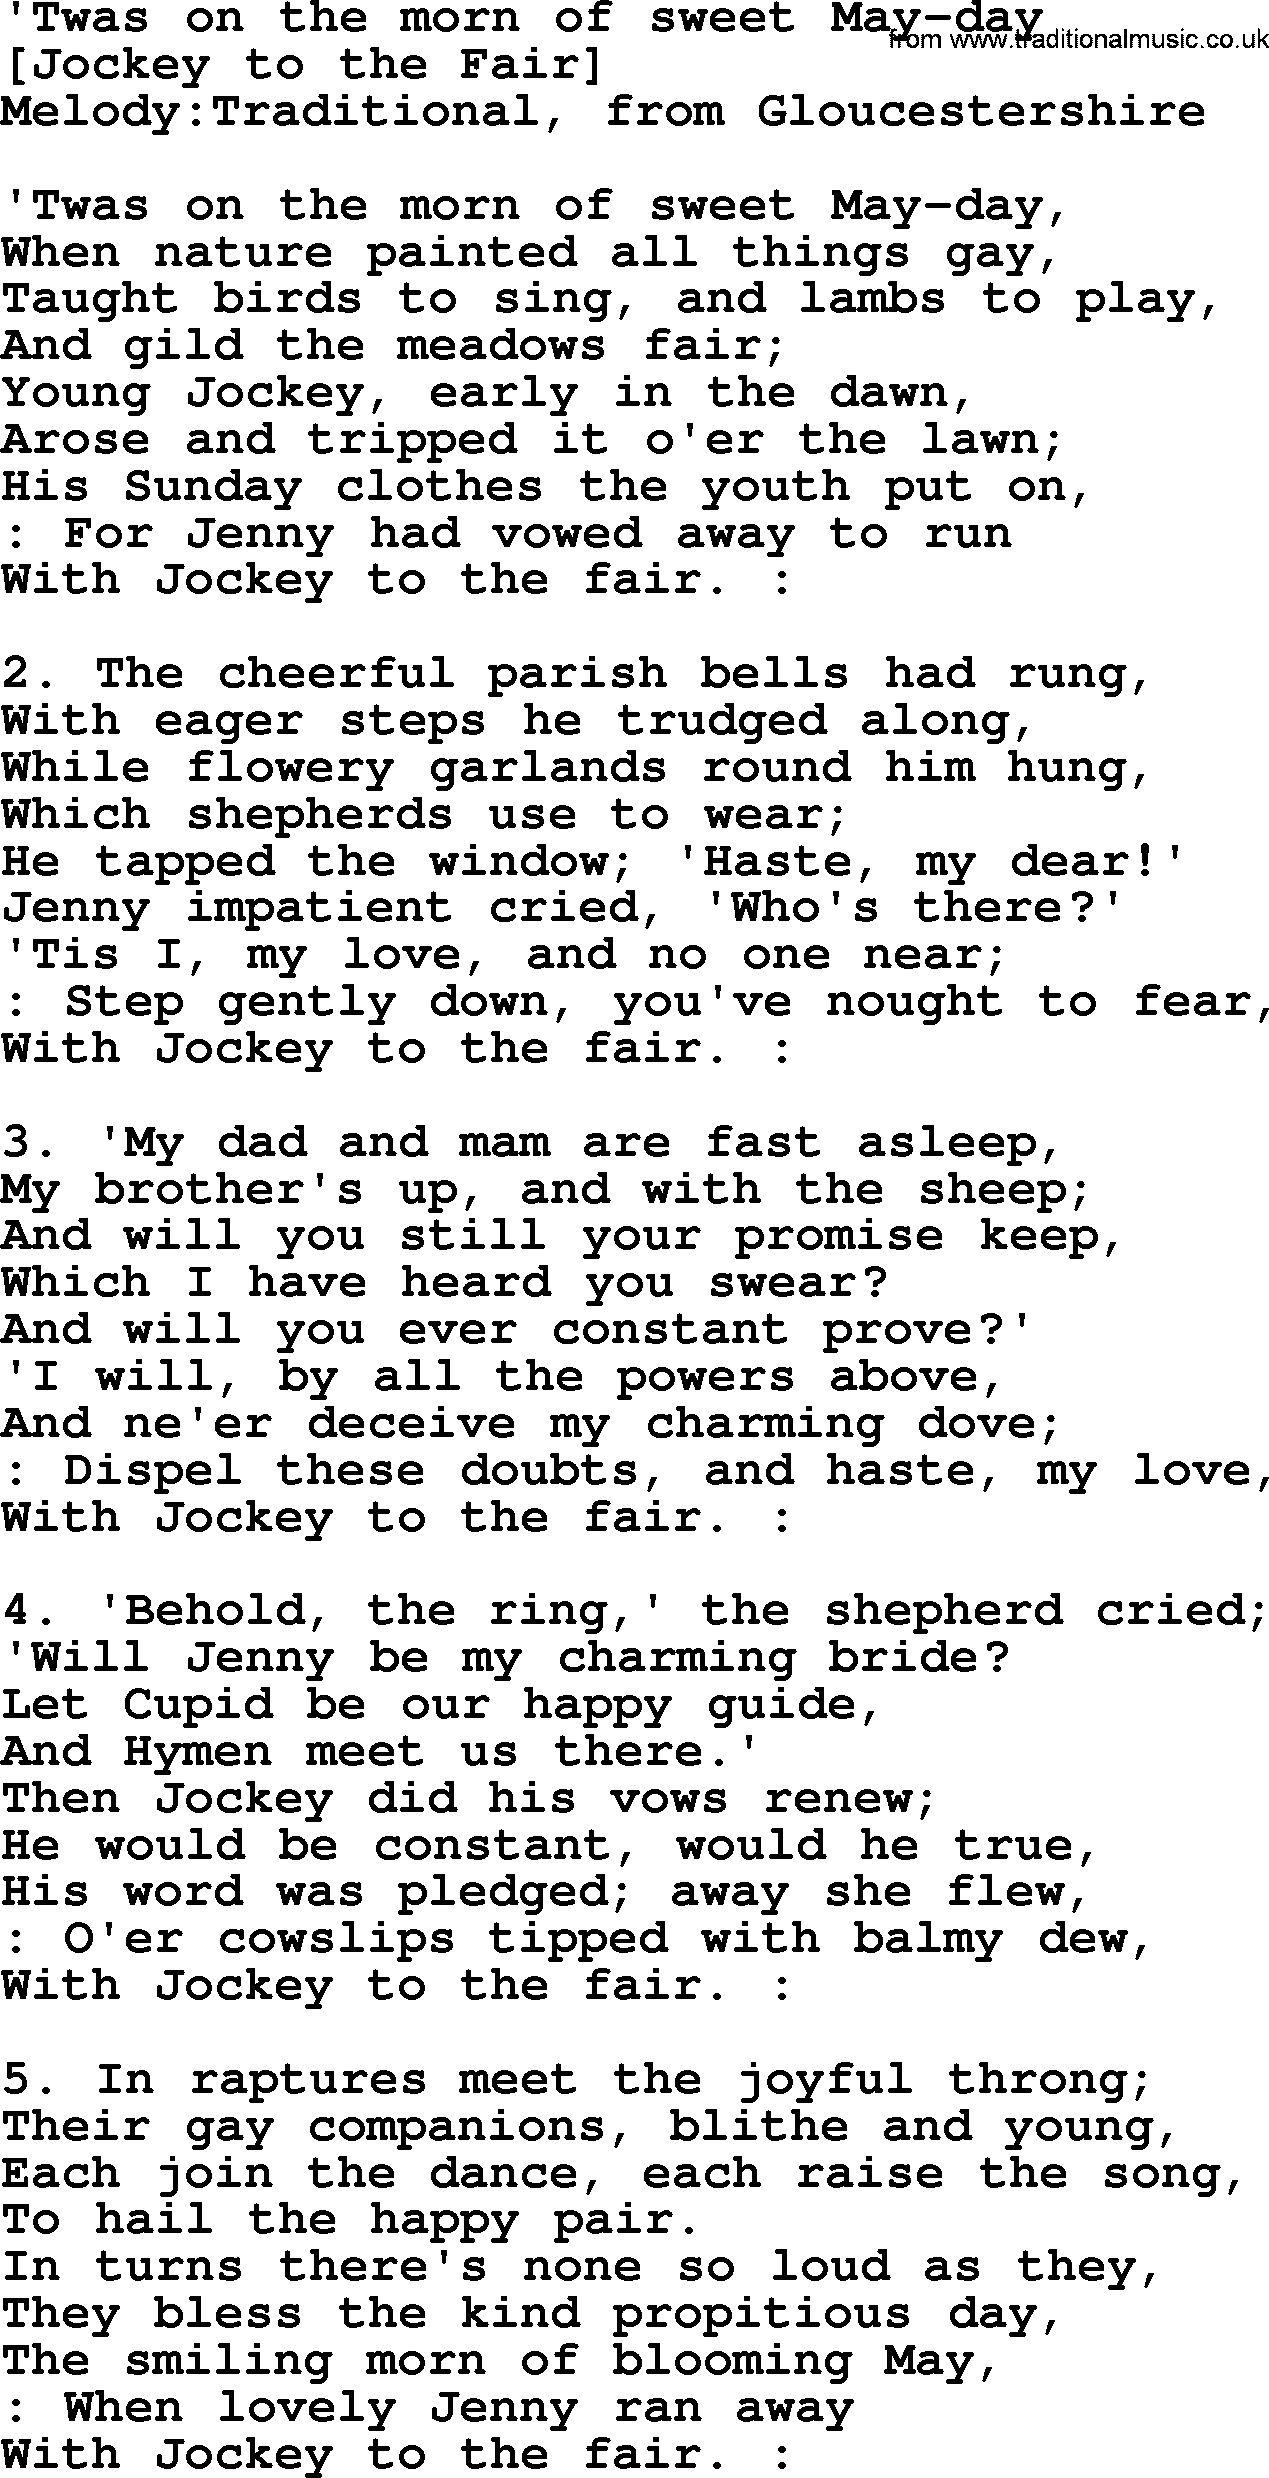 Old English Song: 'Twas On The Morn Of Sweet May-Day lyrics